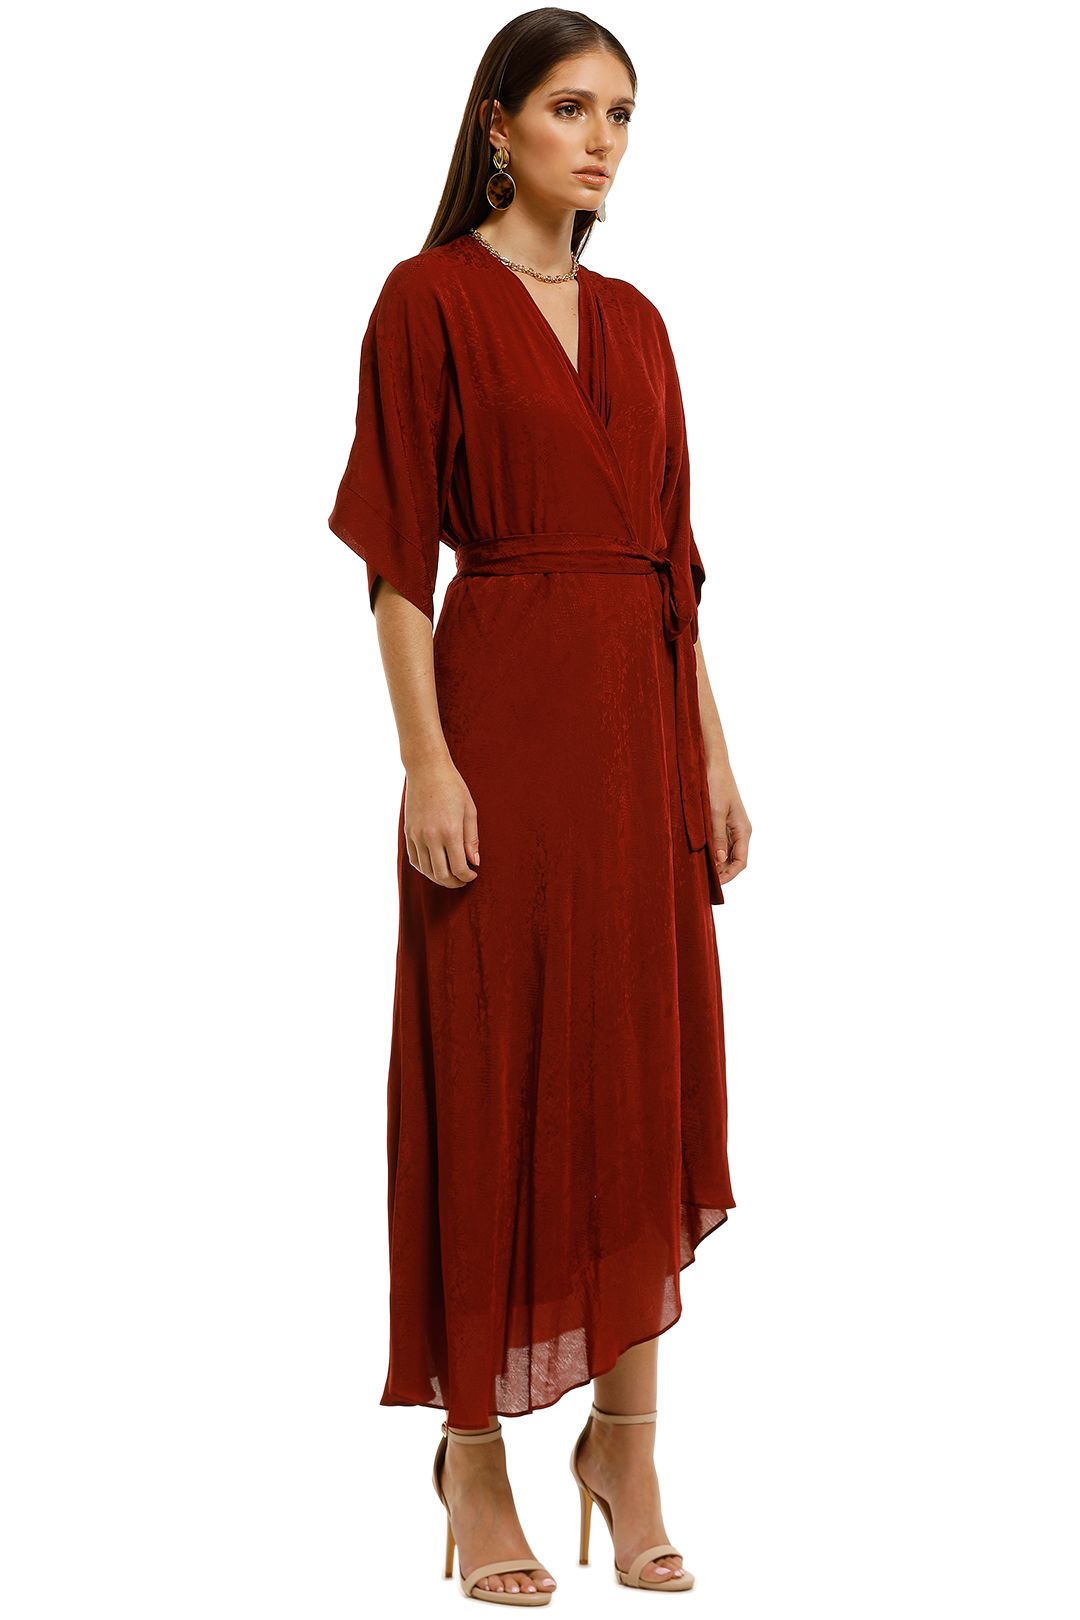 Ginger-and-Smart-Panacea-Wrap-Dress-Rust-Side